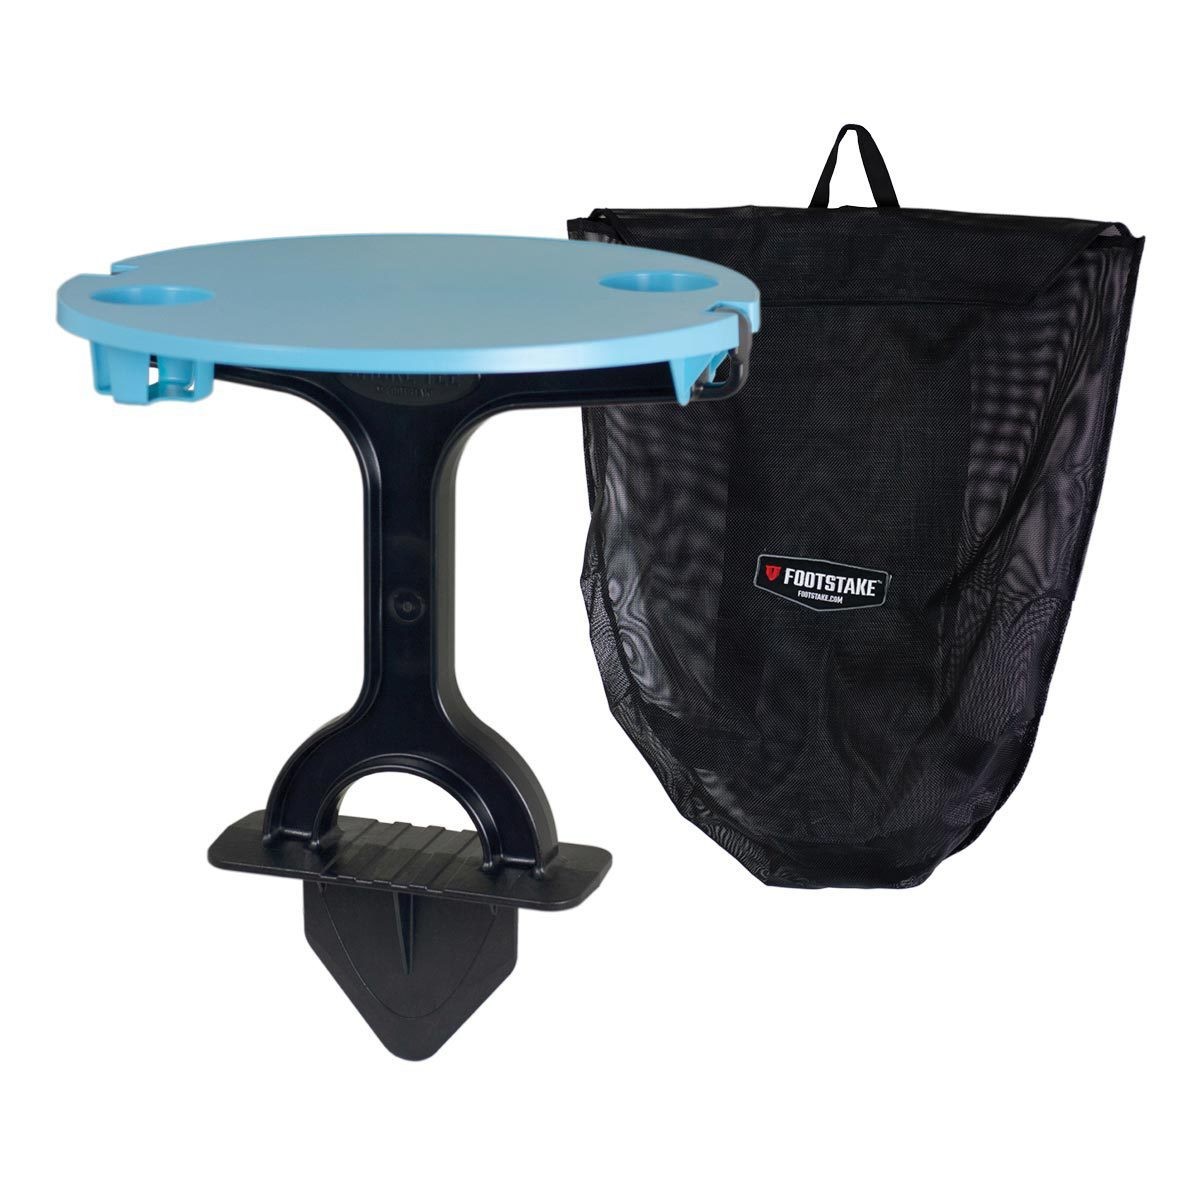 FootStake Tropical Blue Table